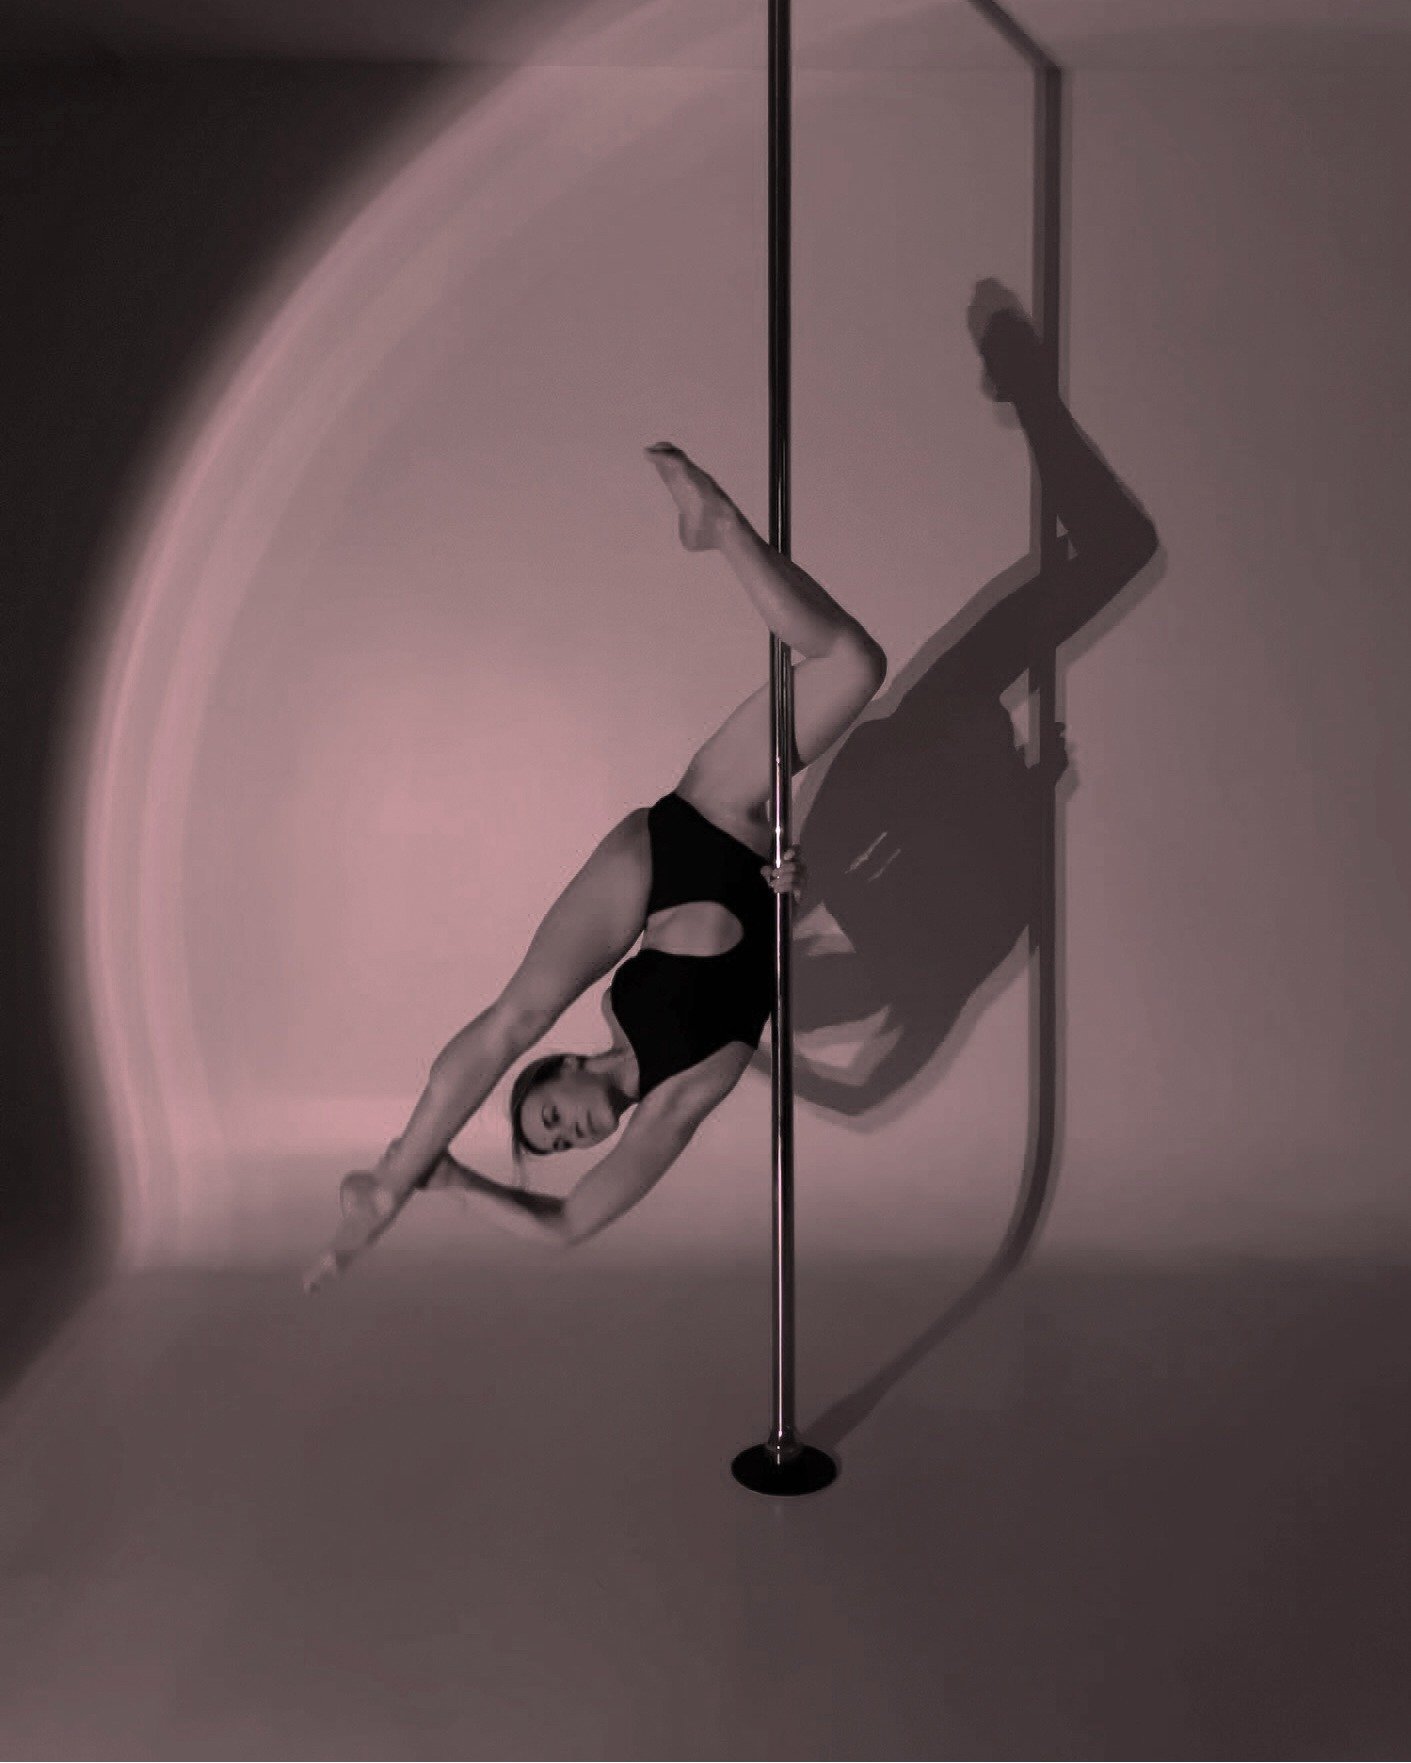 ✨COUNTING DOWN✨ 1 more week until you get to pole dance with stunning lights and dramatic shadows 🌟 For now enjoy this stunning pose by our instructor Jessica.

See more details below or send us a DM 🥰
The workshop is for ALL LEVELS and consists of